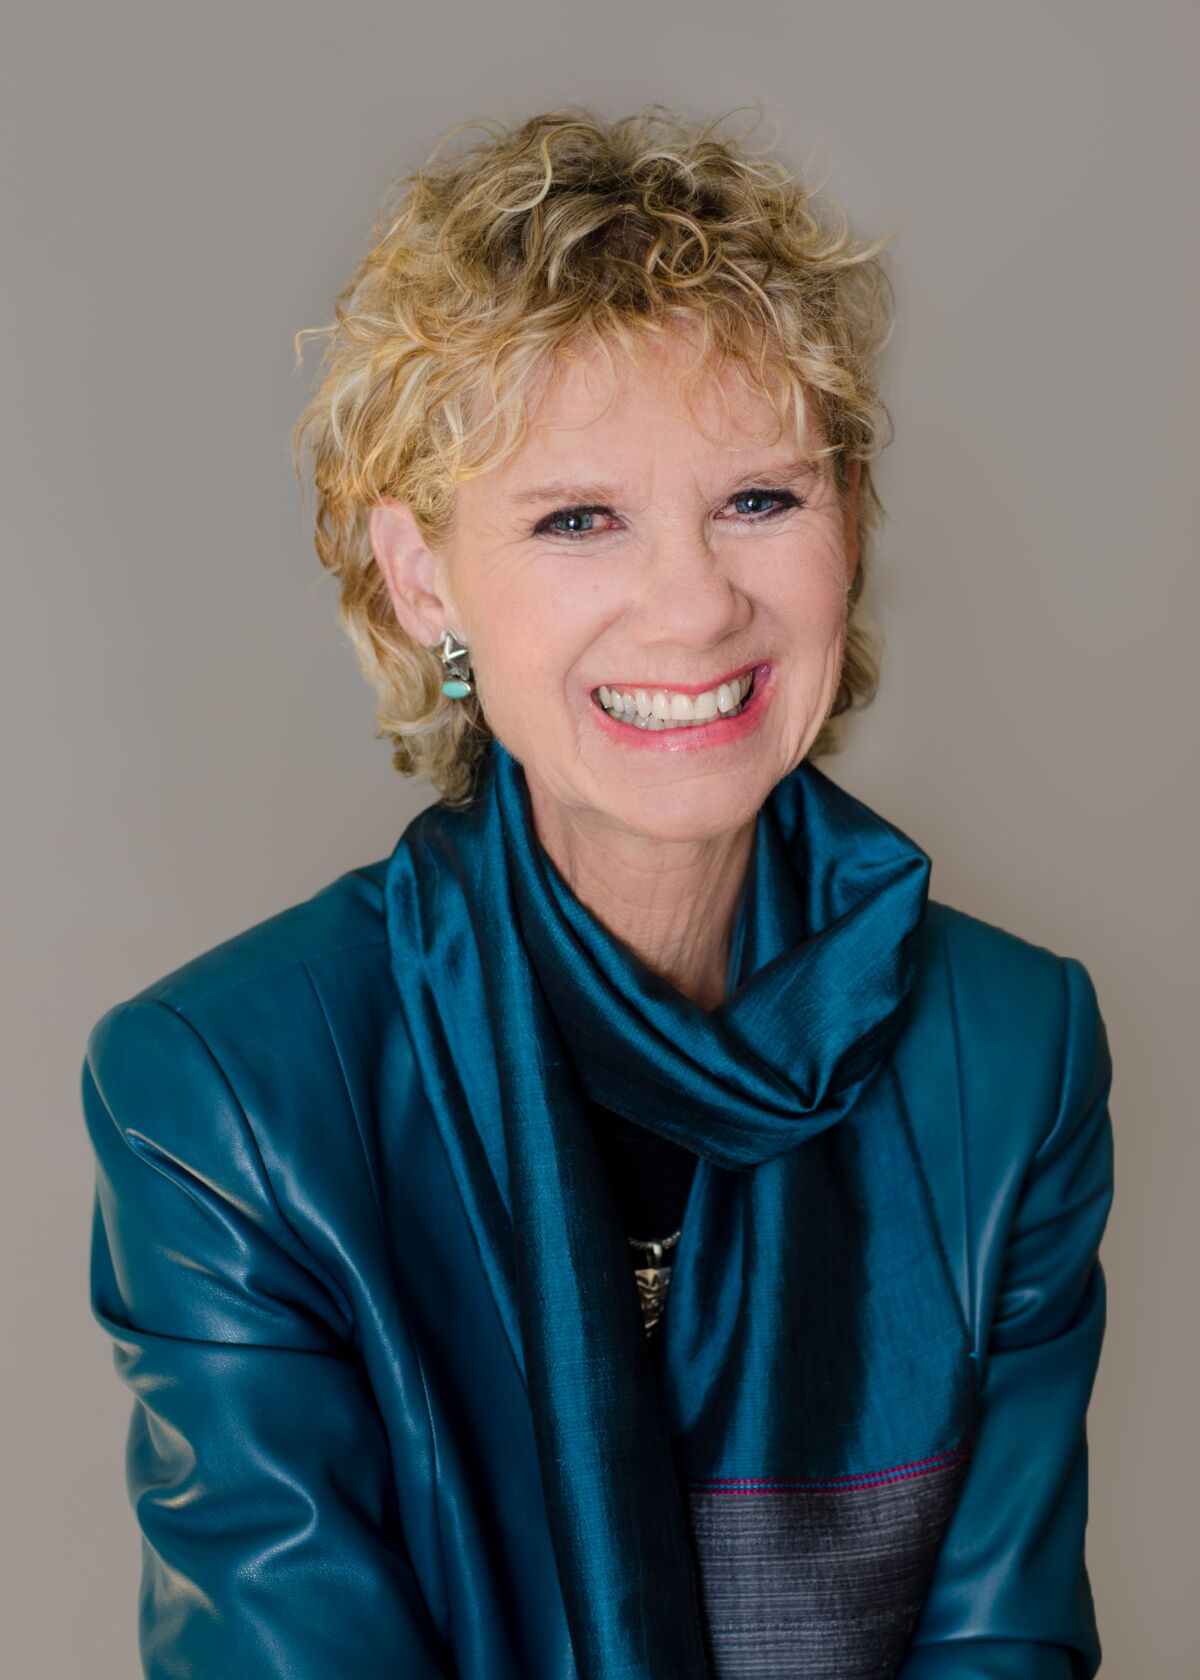 Author, columnist and personal finance expert Kerry Hannon.